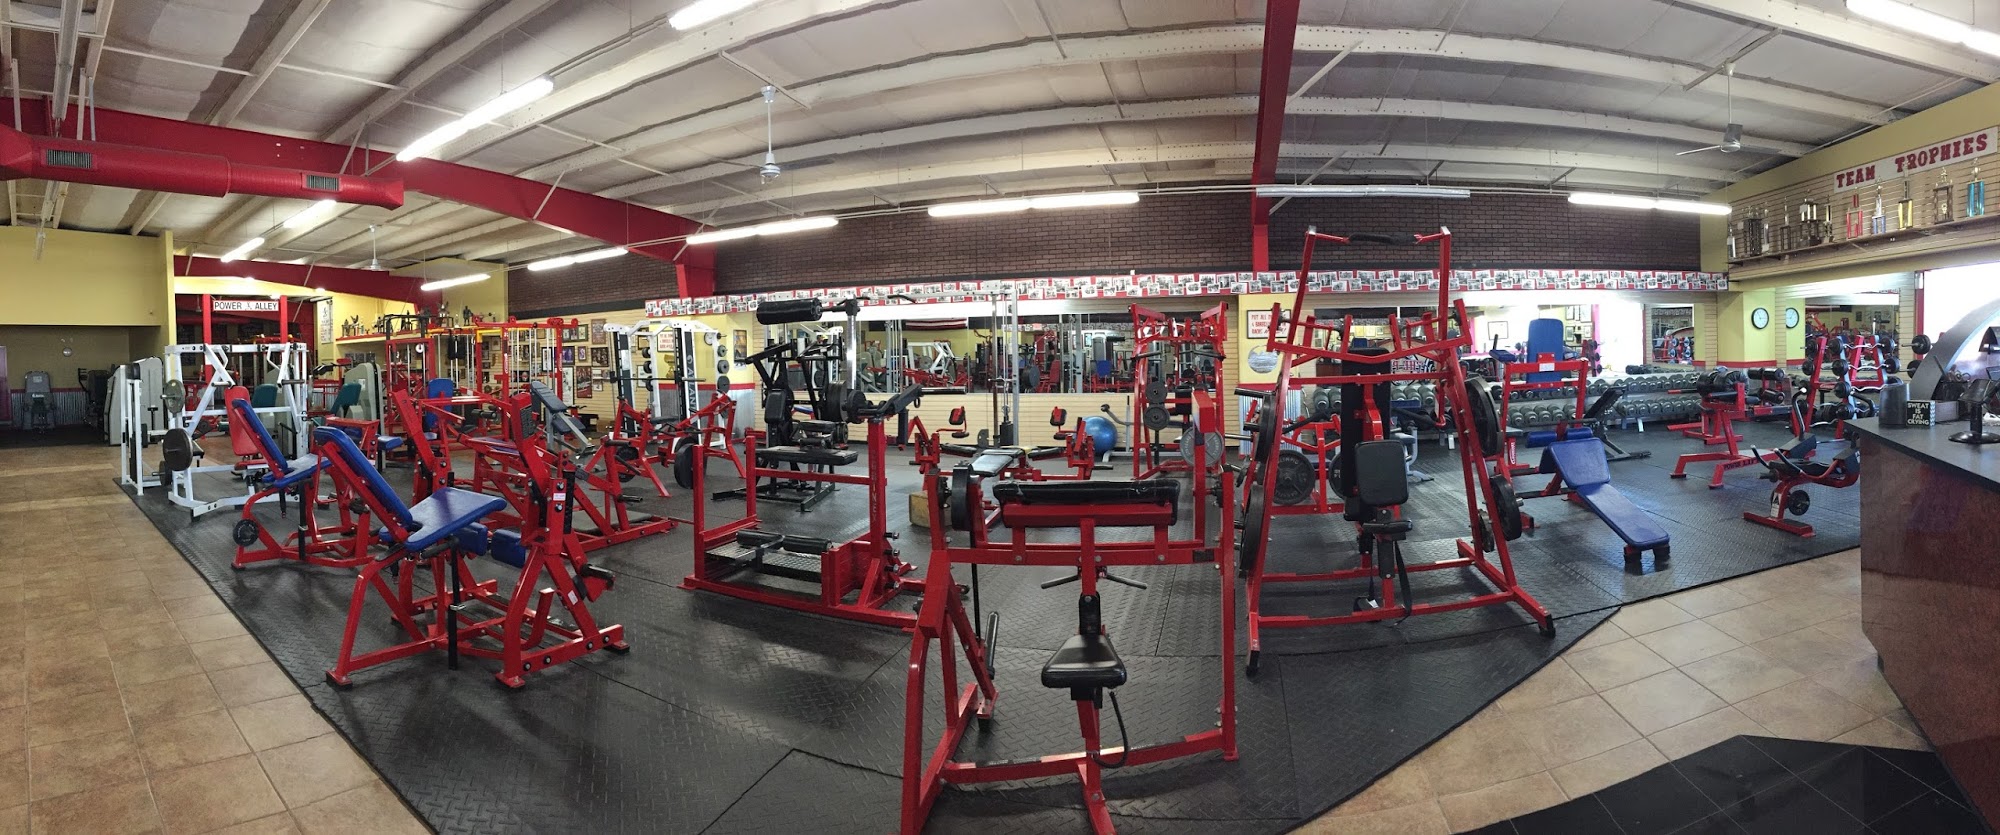 The Pit Barbell Club & Fitness Center